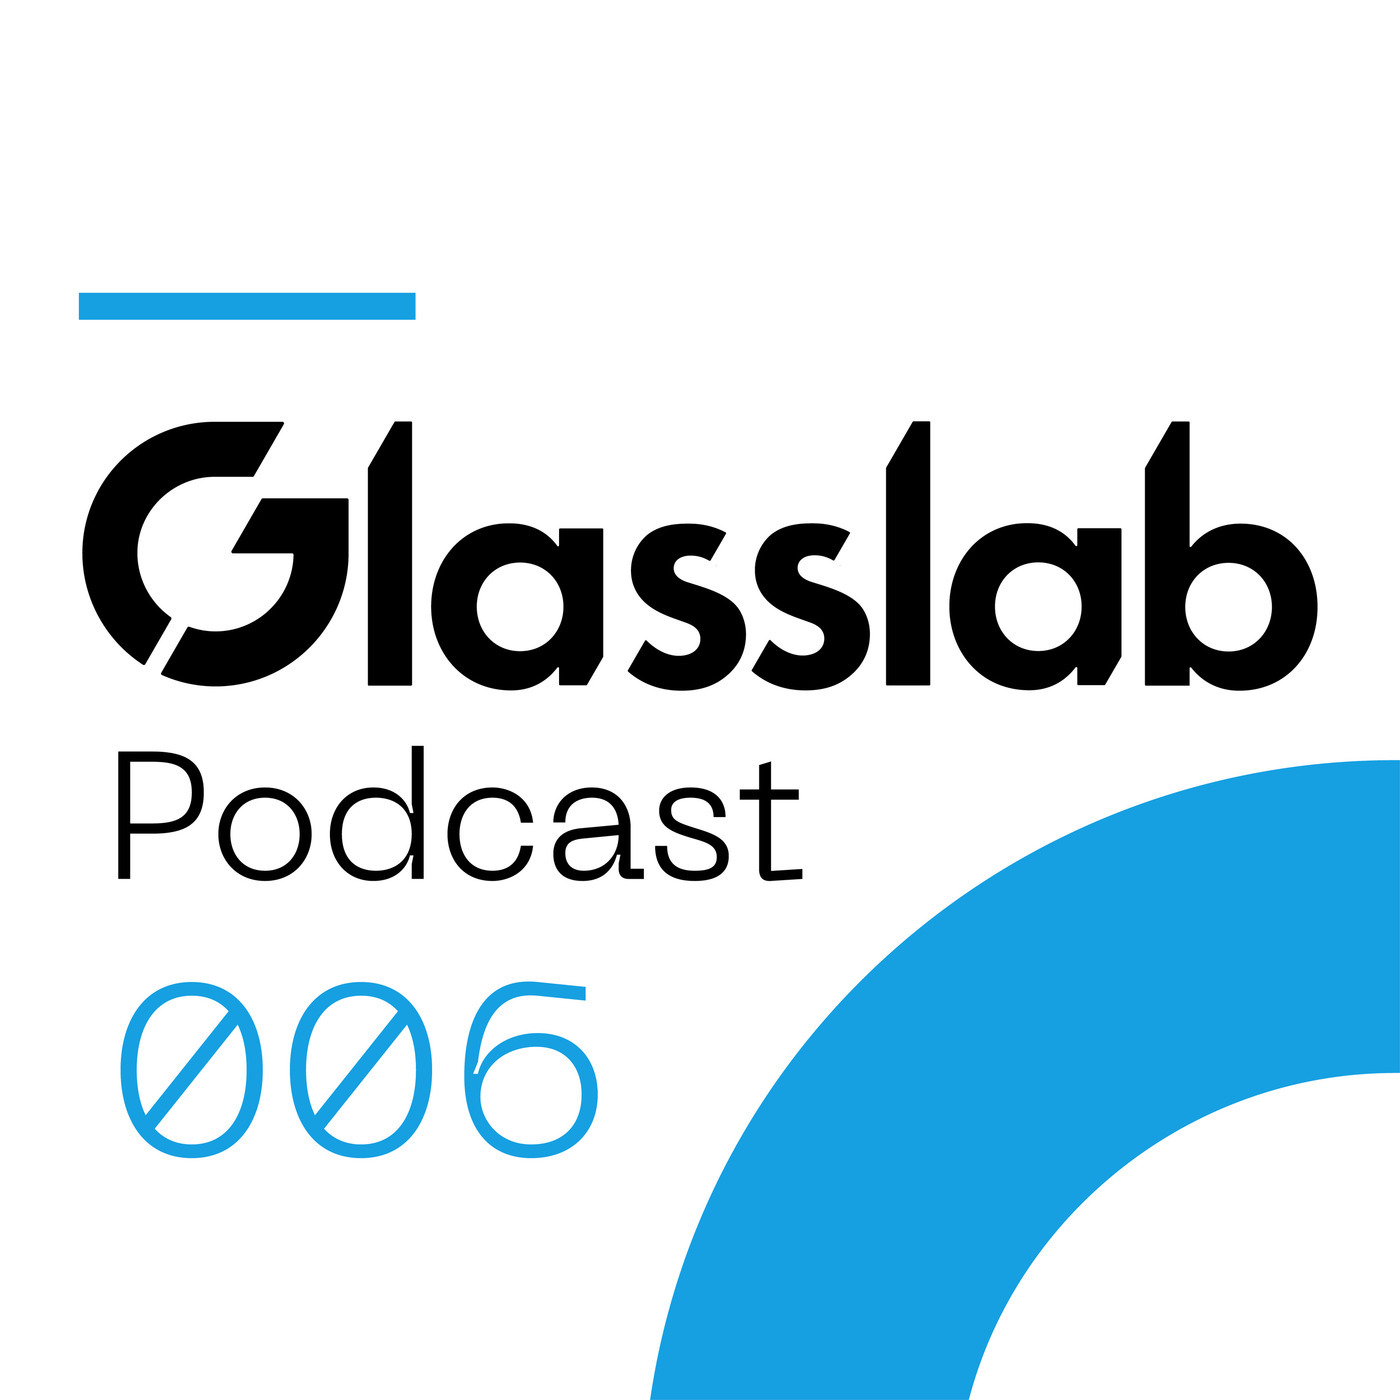 Glasslab Podcast 6: Battery Innovation with Ben Wrightsman